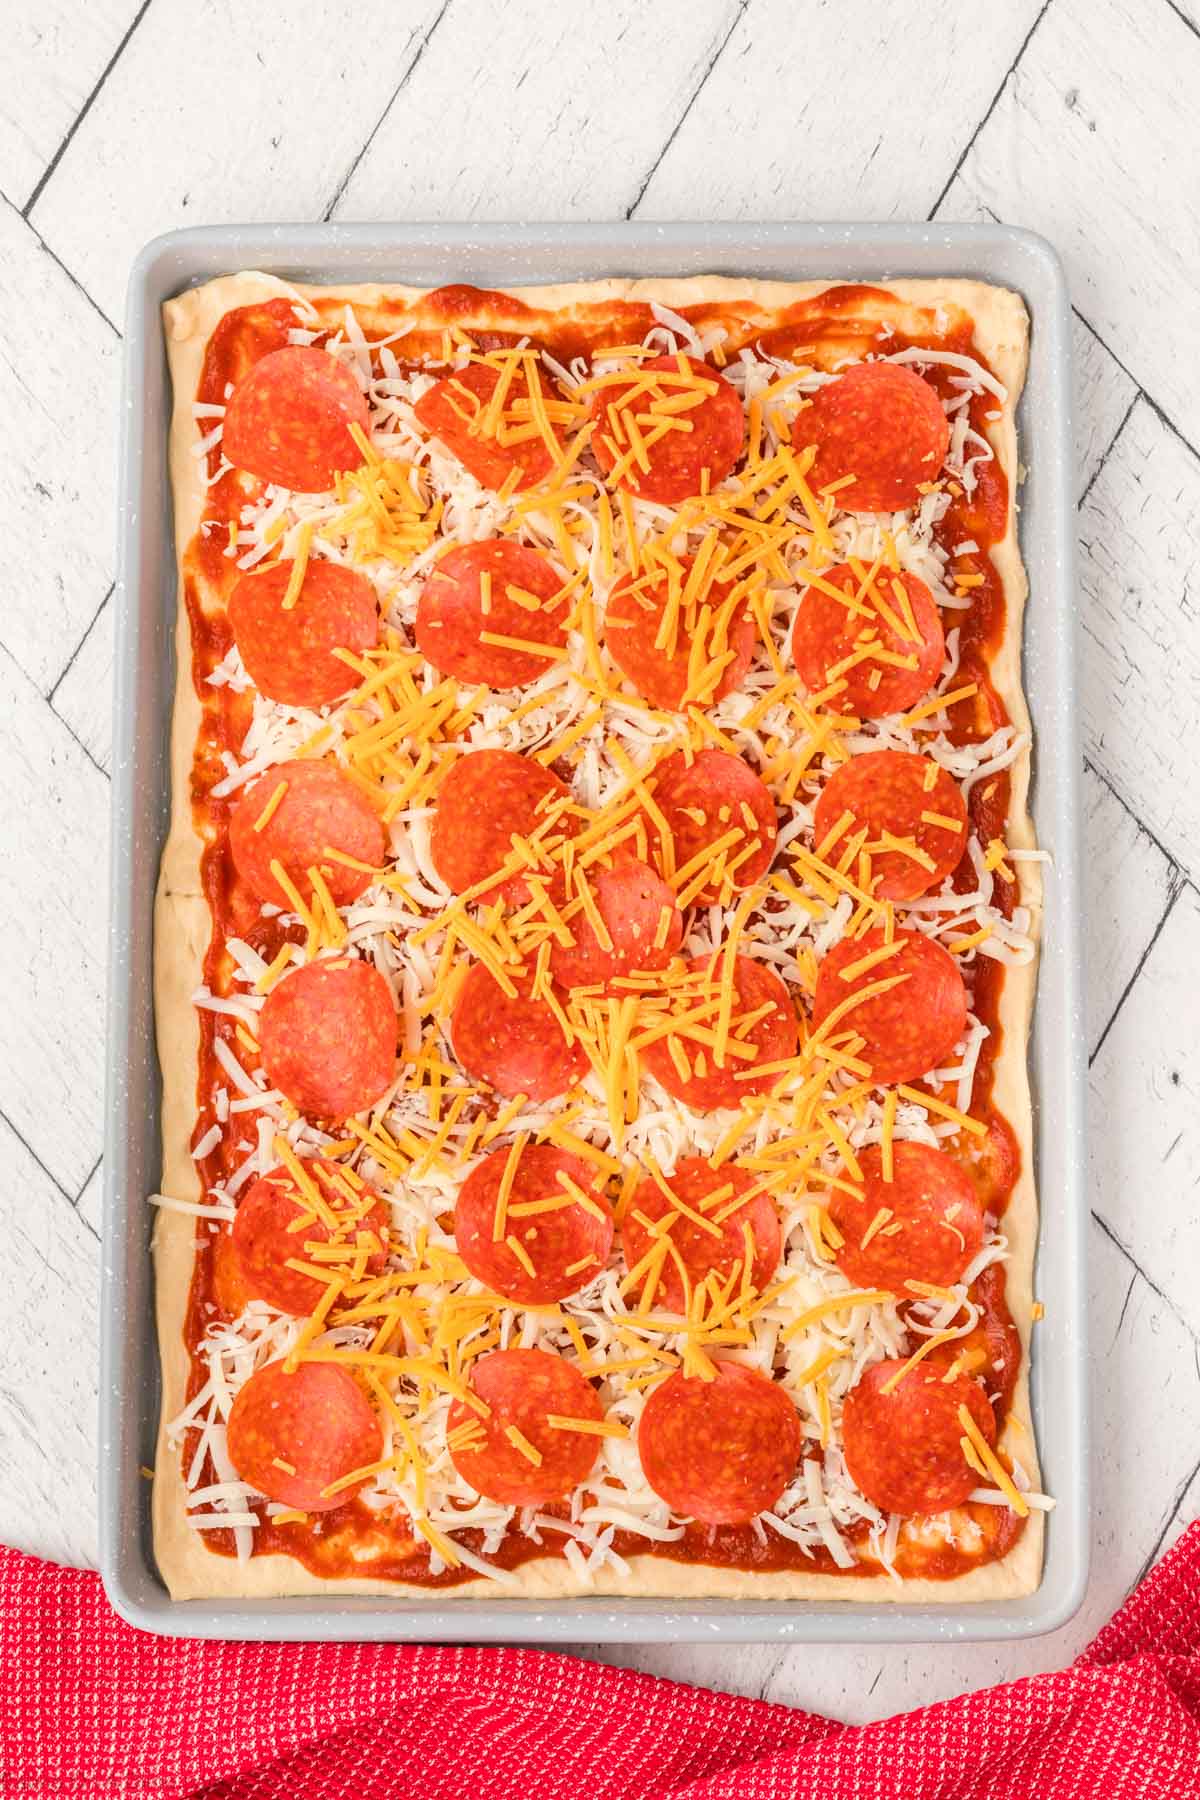 Topping with shredded cheese